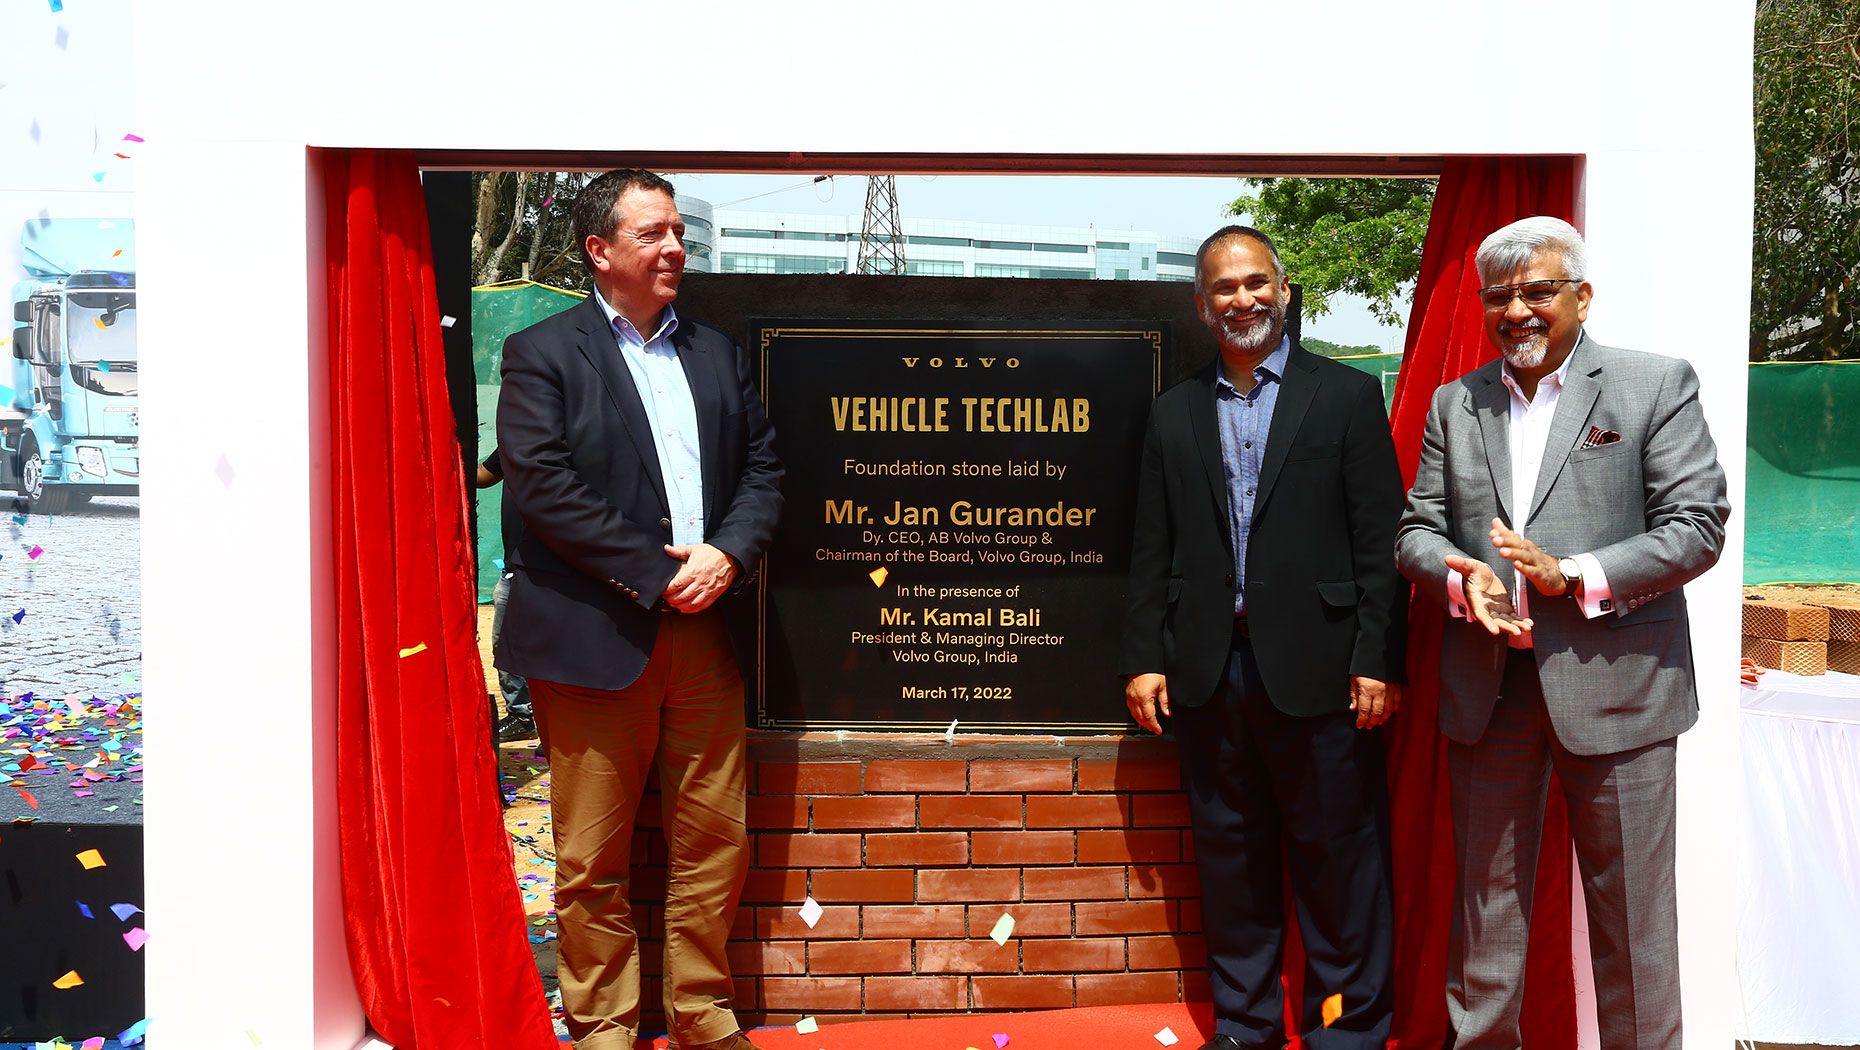 Jan Gurander, Deputy CEO, Volvo Group today laid the foundation for the “Vehicle TechLab” for Volvo Group’s Research and Development operations in India. 